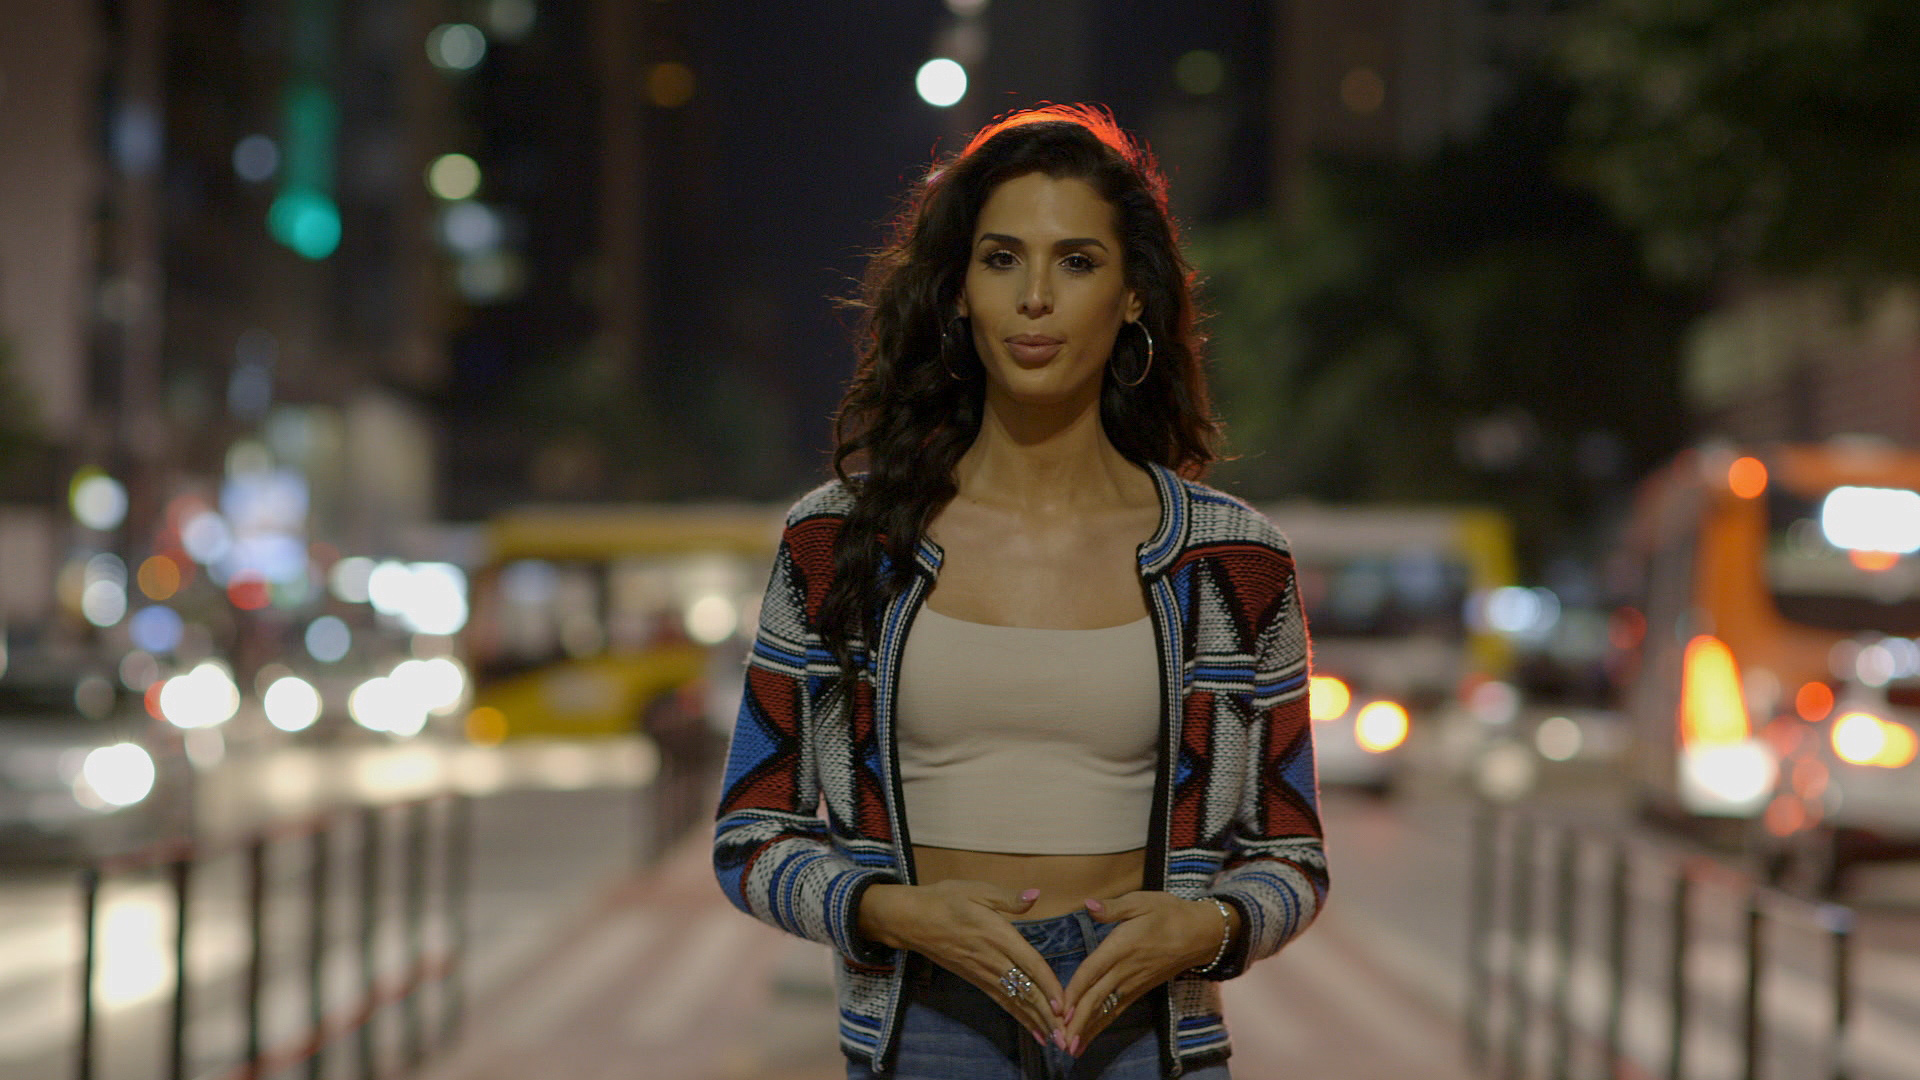 Carmen Carrera on Activism, Traveling & Her New OUTPOST Docuseries